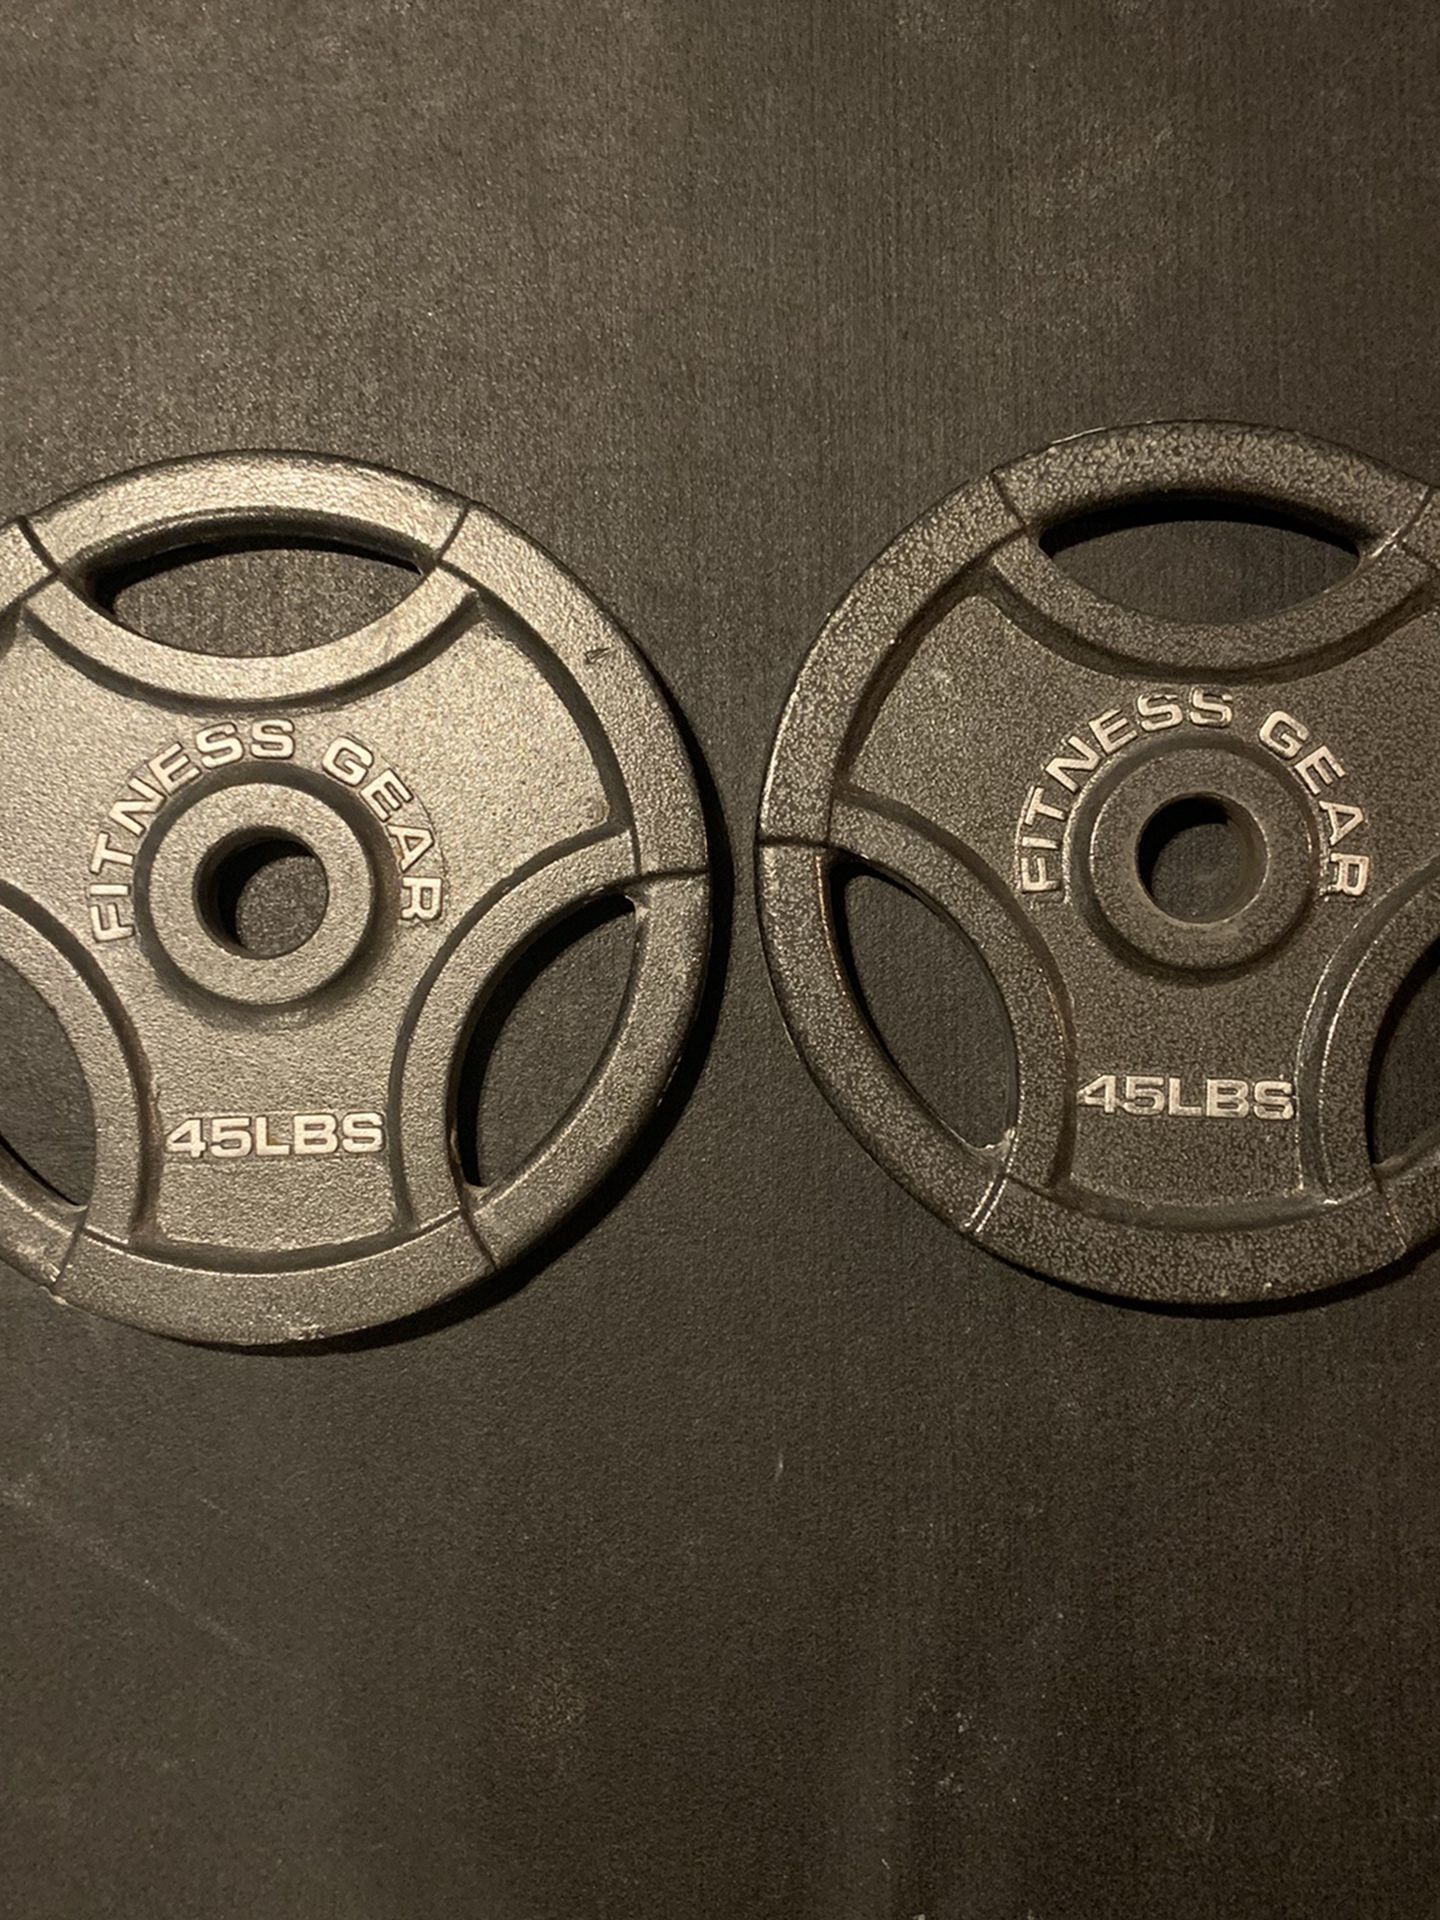 PENDING - Olympic Weights 45 Lb Pair